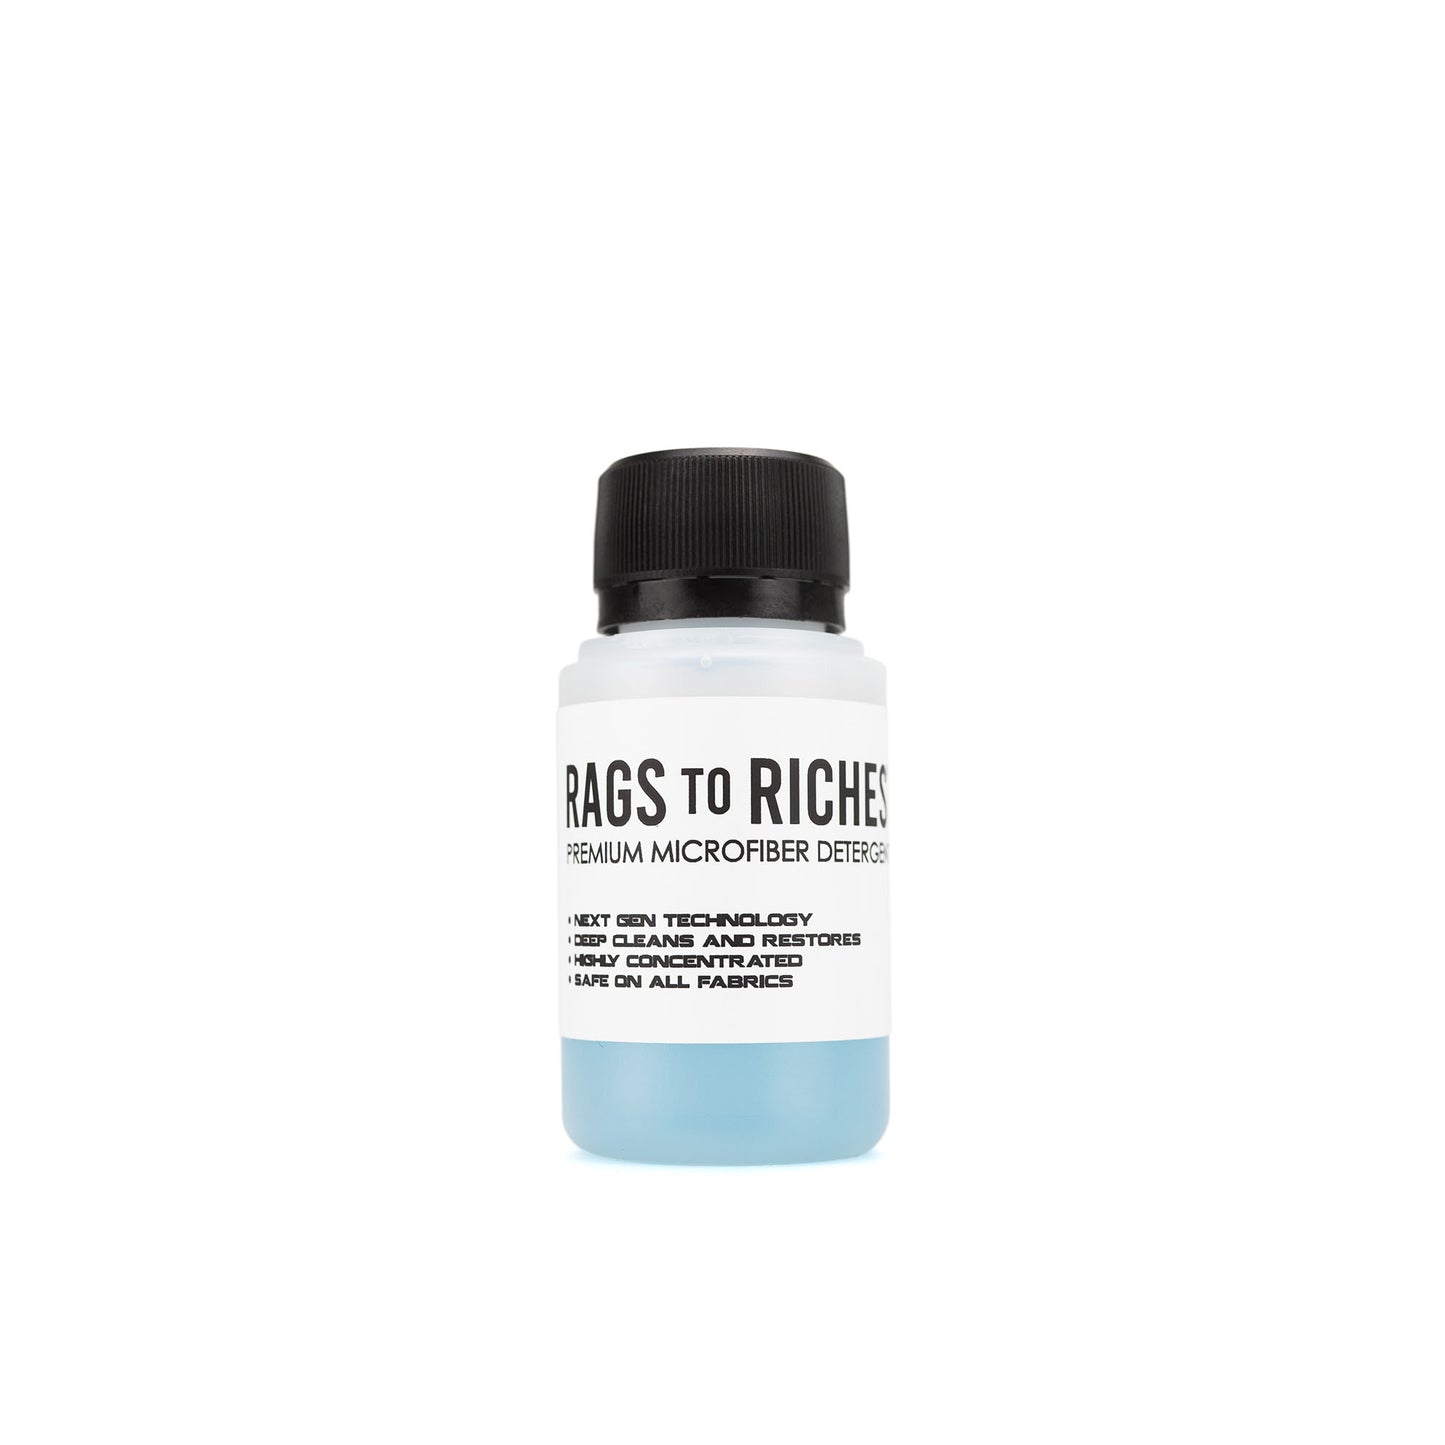 Rags To Riches Microfiber Detergent by P&S | Try a Sample for €2,00 - The Rag Company Europe"